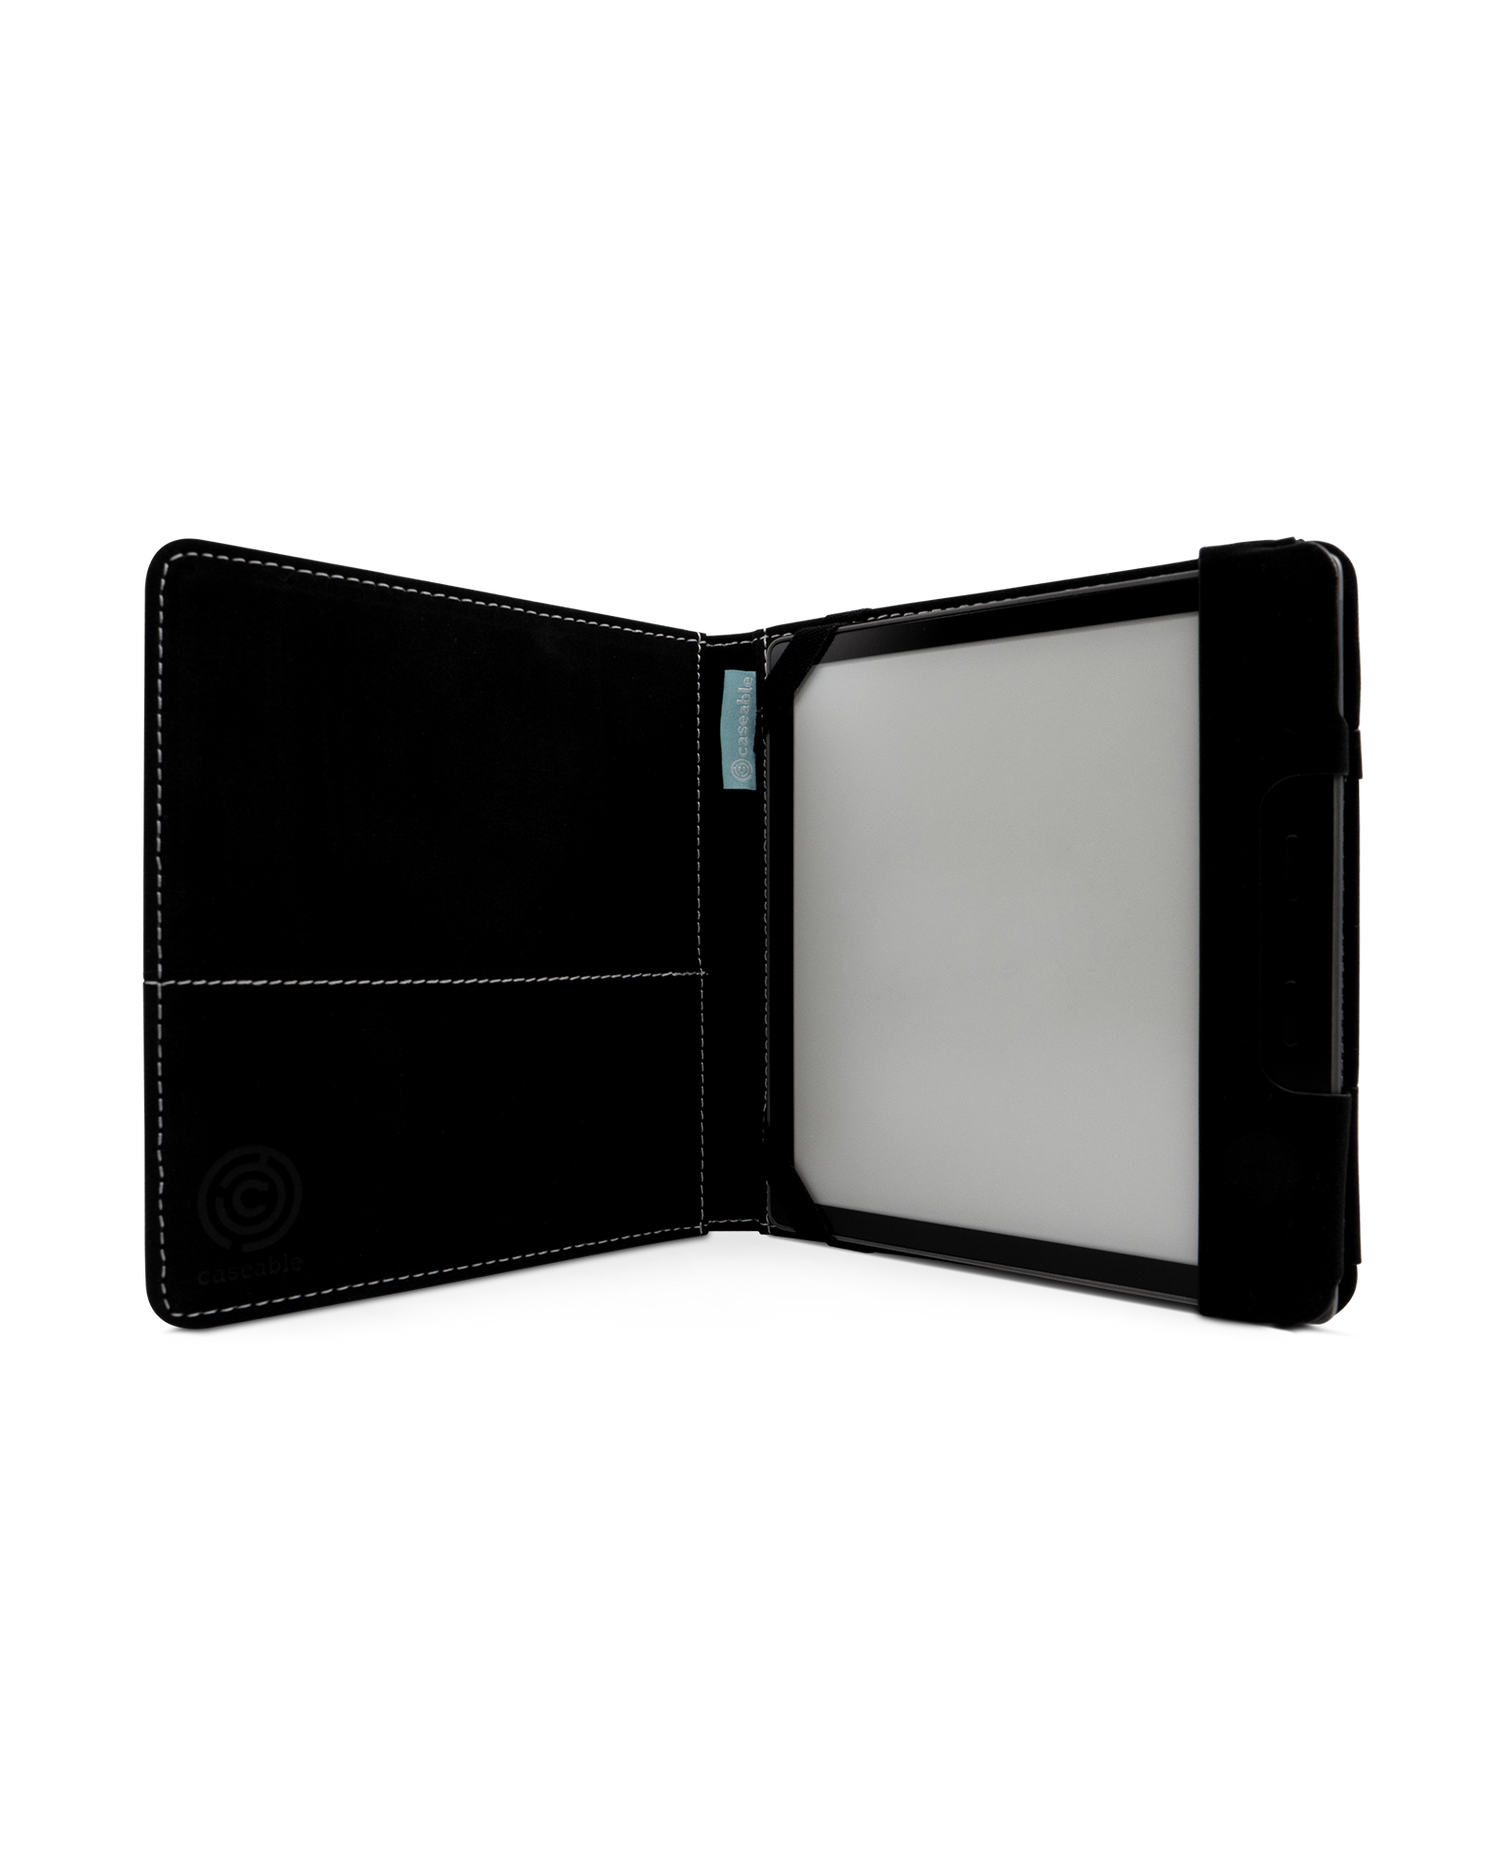 Mint Swirl eReader Case for tolino vision 6: Opened interior view